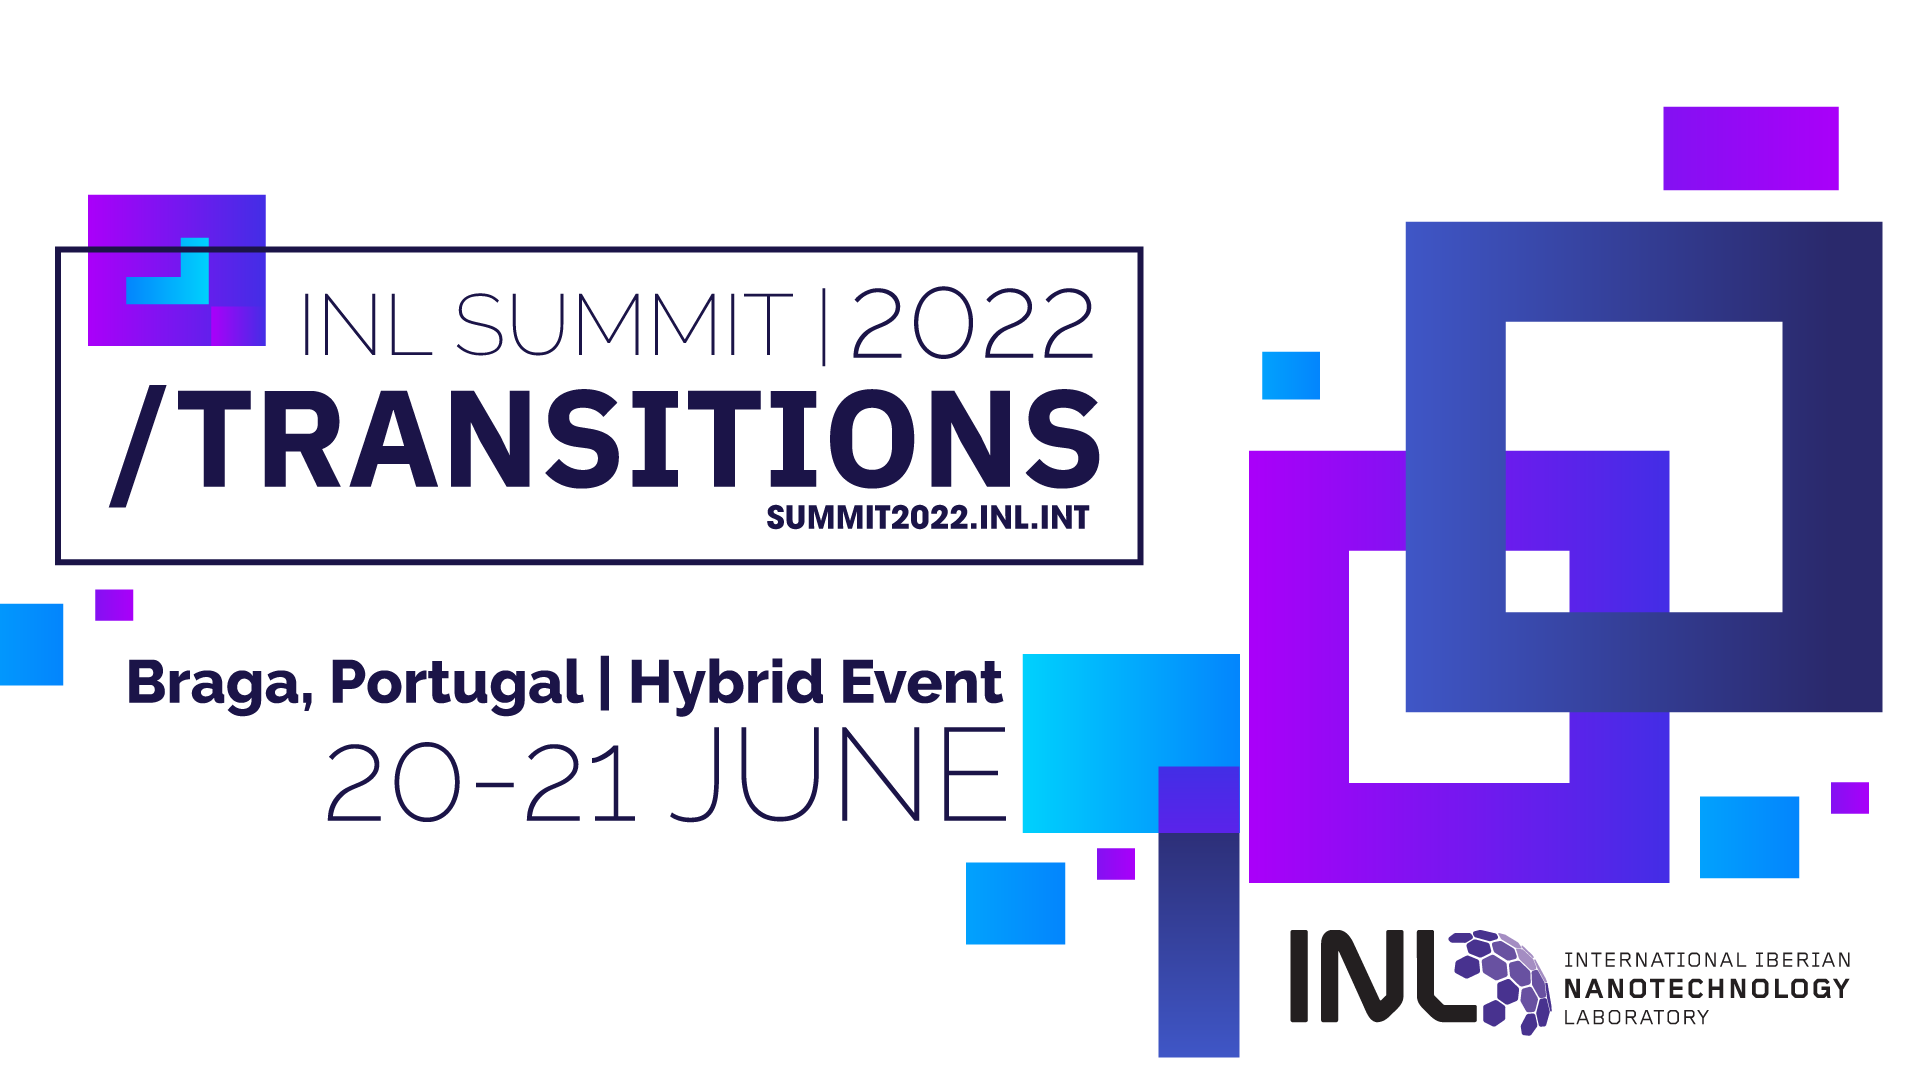 The INL Summit 2022 is back and opens the debate on transitions